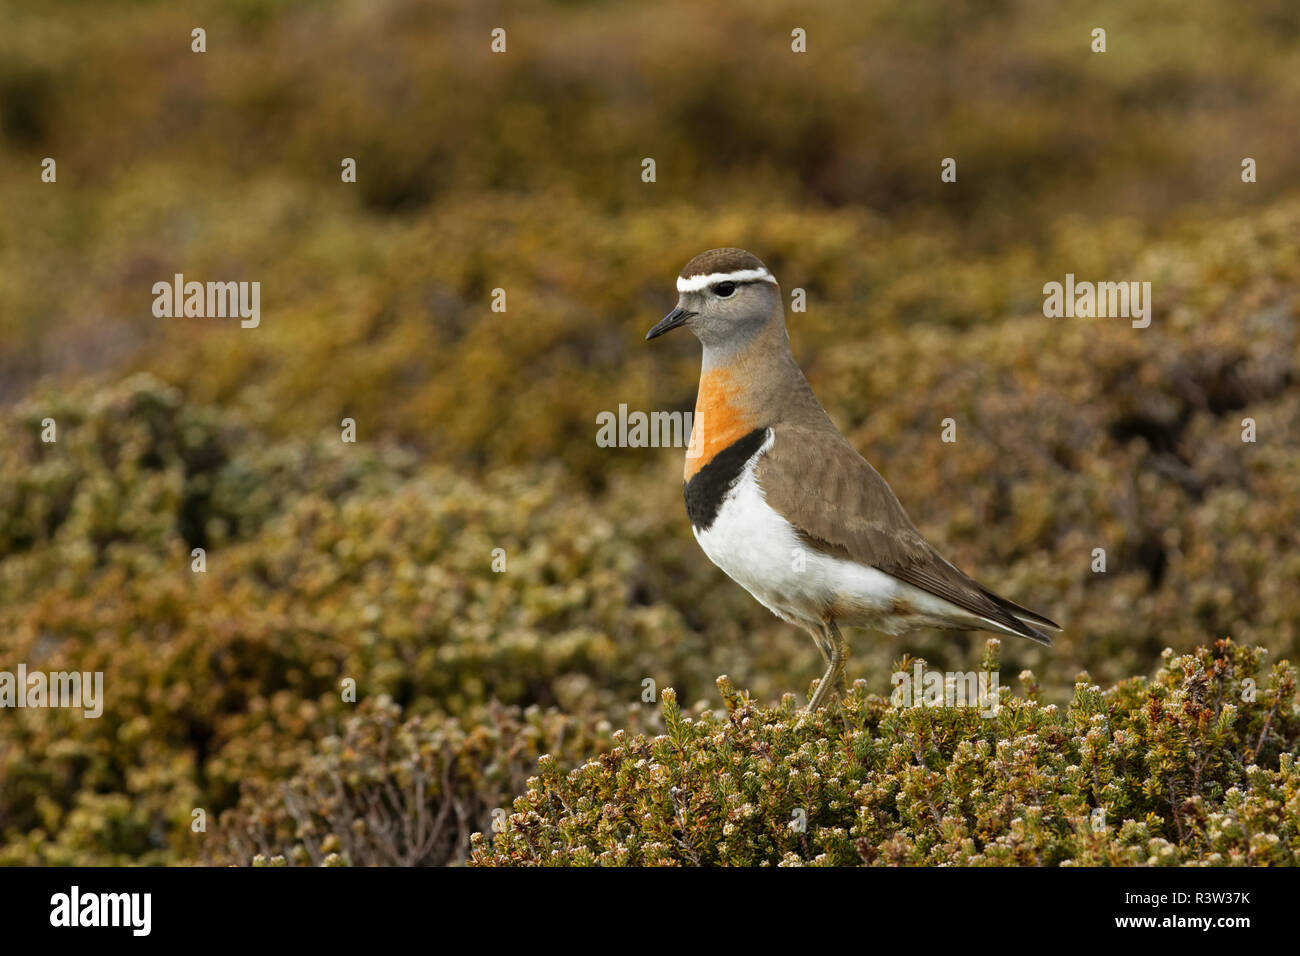 Rufous Chested Dotterel, Charadrius modestus, also known as Rufous-Chested Plover, Falkland Islands Stock Photo